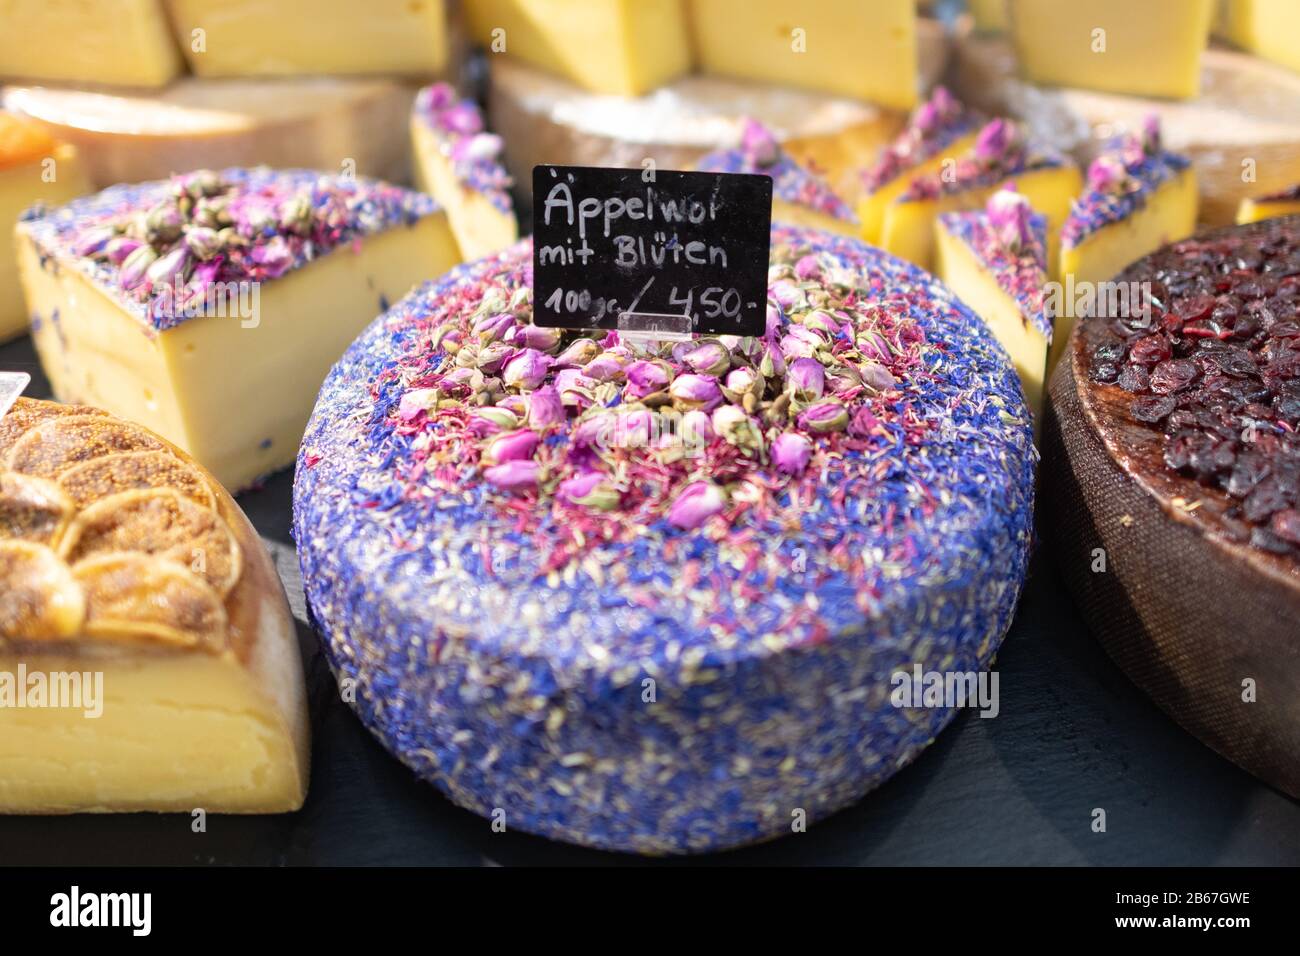 Apfelwein (Appelwoi) cheese decorated with cornflower petals and rose petals at Main Gourmet stand at Kleinmarkthalle, Frankfurt, Germany Stock Photo